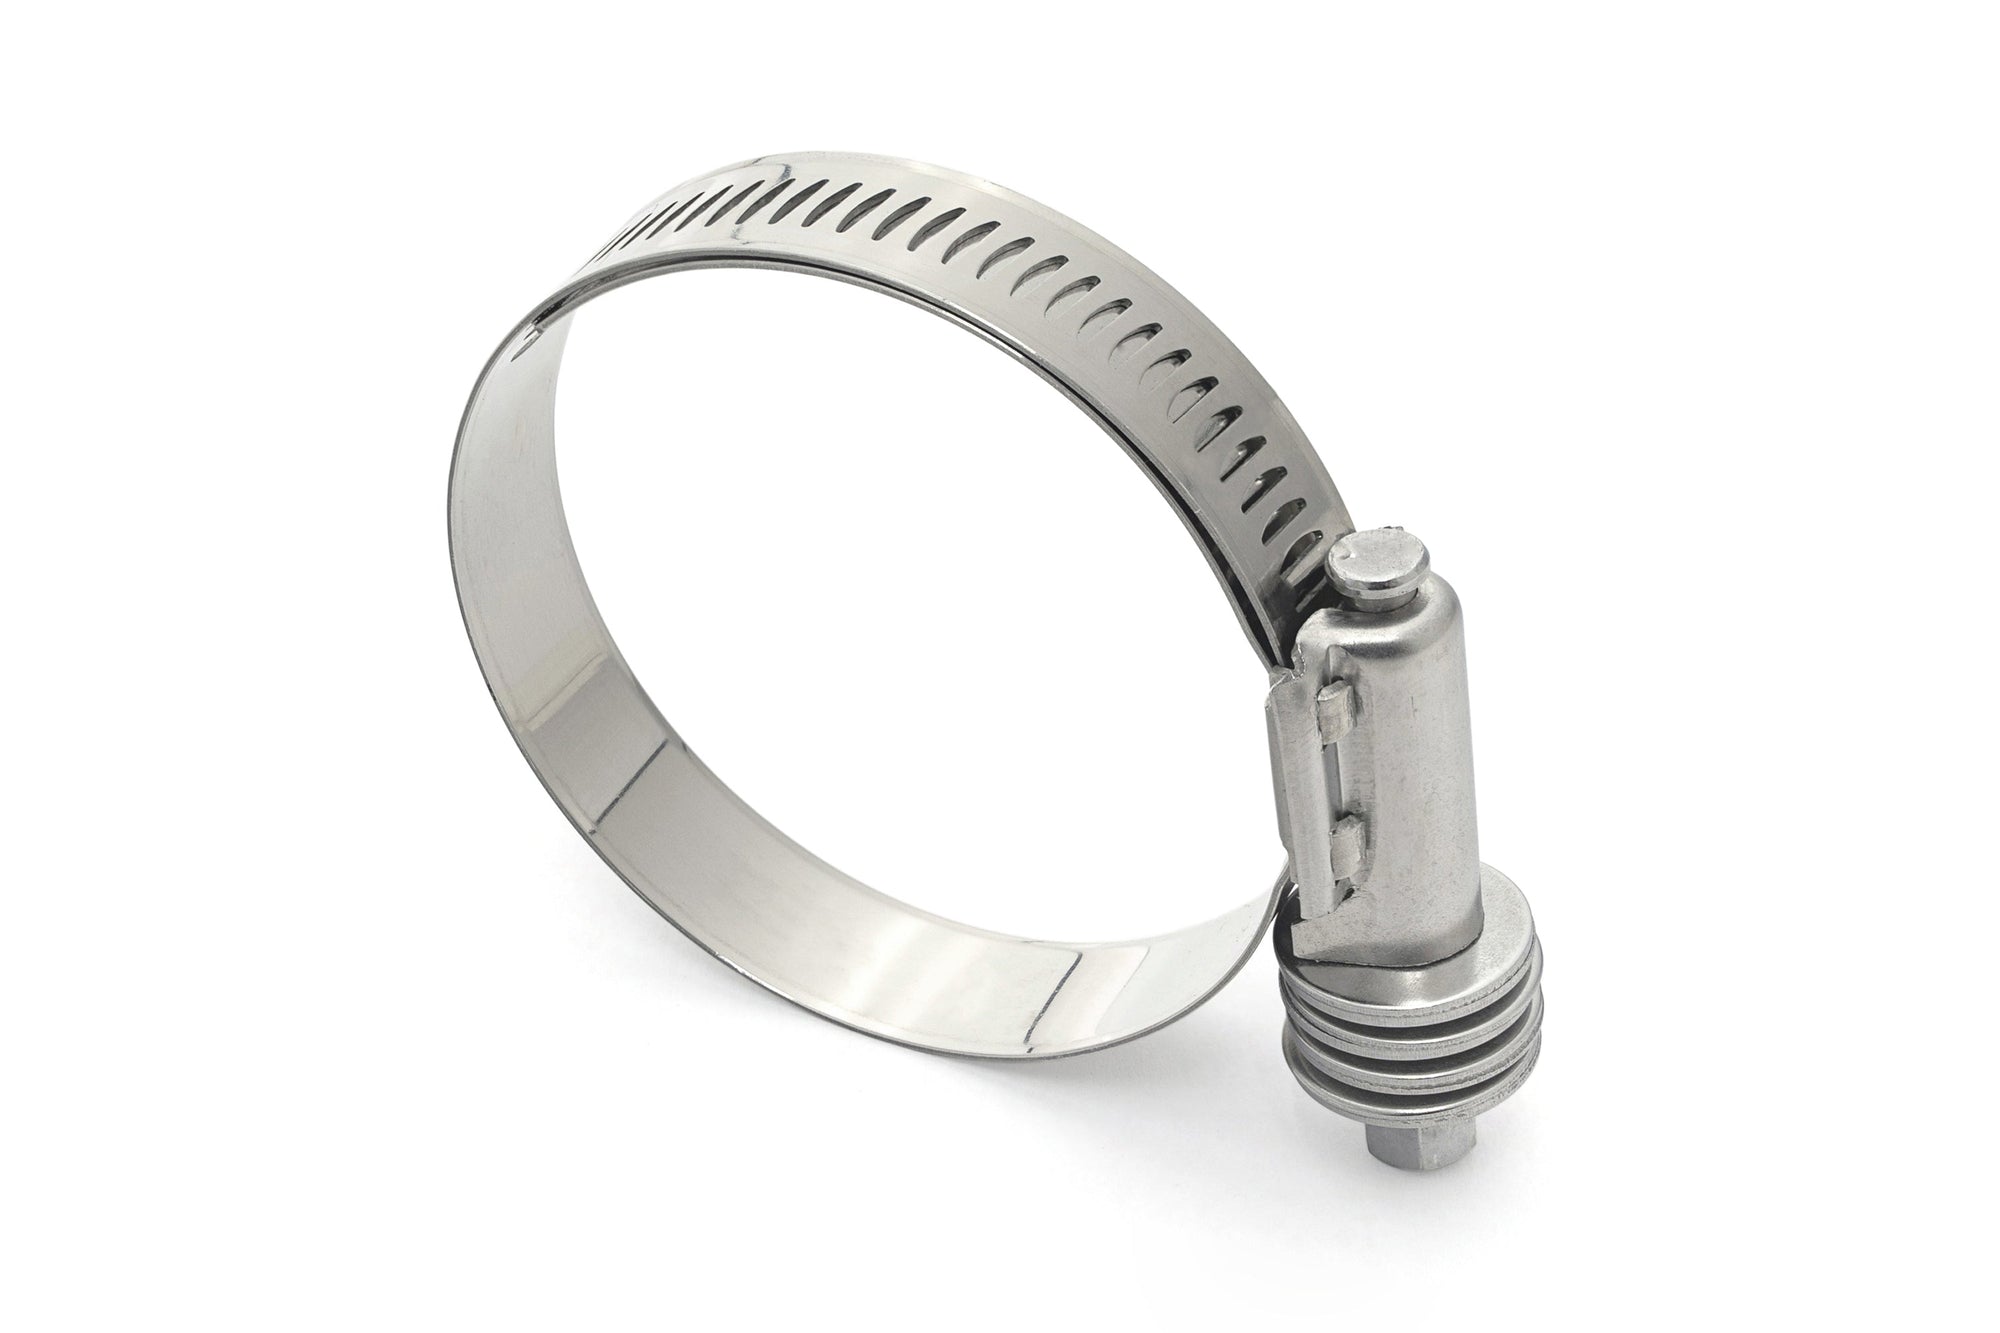 HPS Stainless Steel Constant Torque Hose Clamp CTF-250 1-9/16 2-1/2 inch 40mm - 64mm Size # 32